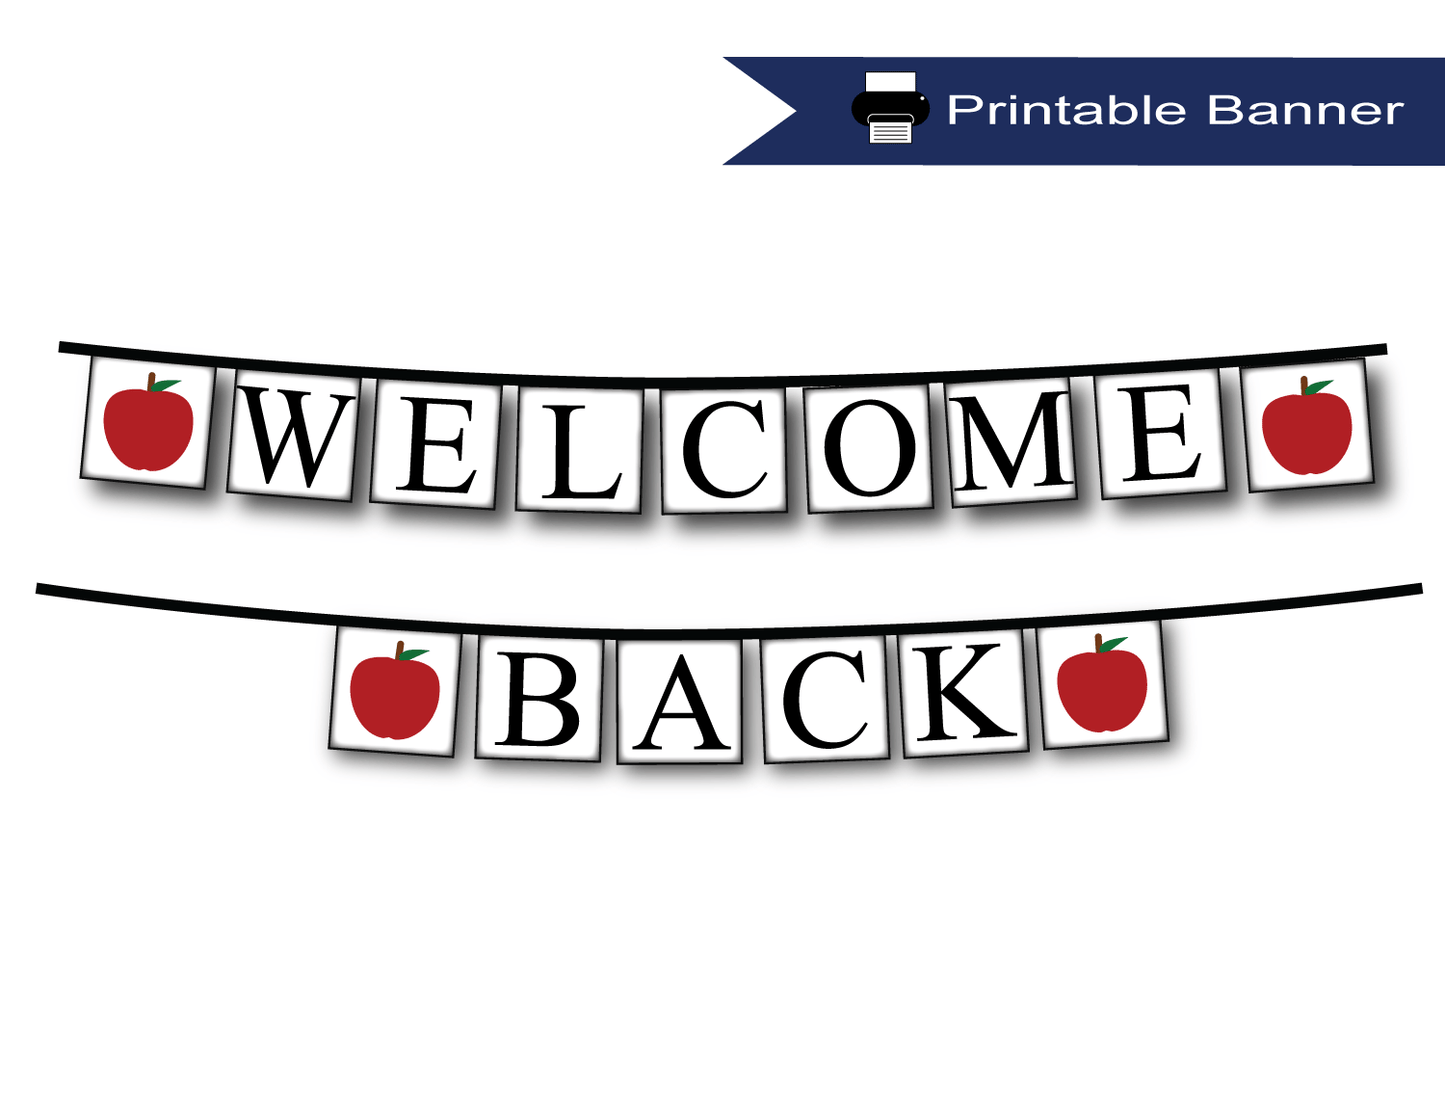 Welcome back banner for classroom decorations - Celebrating Together